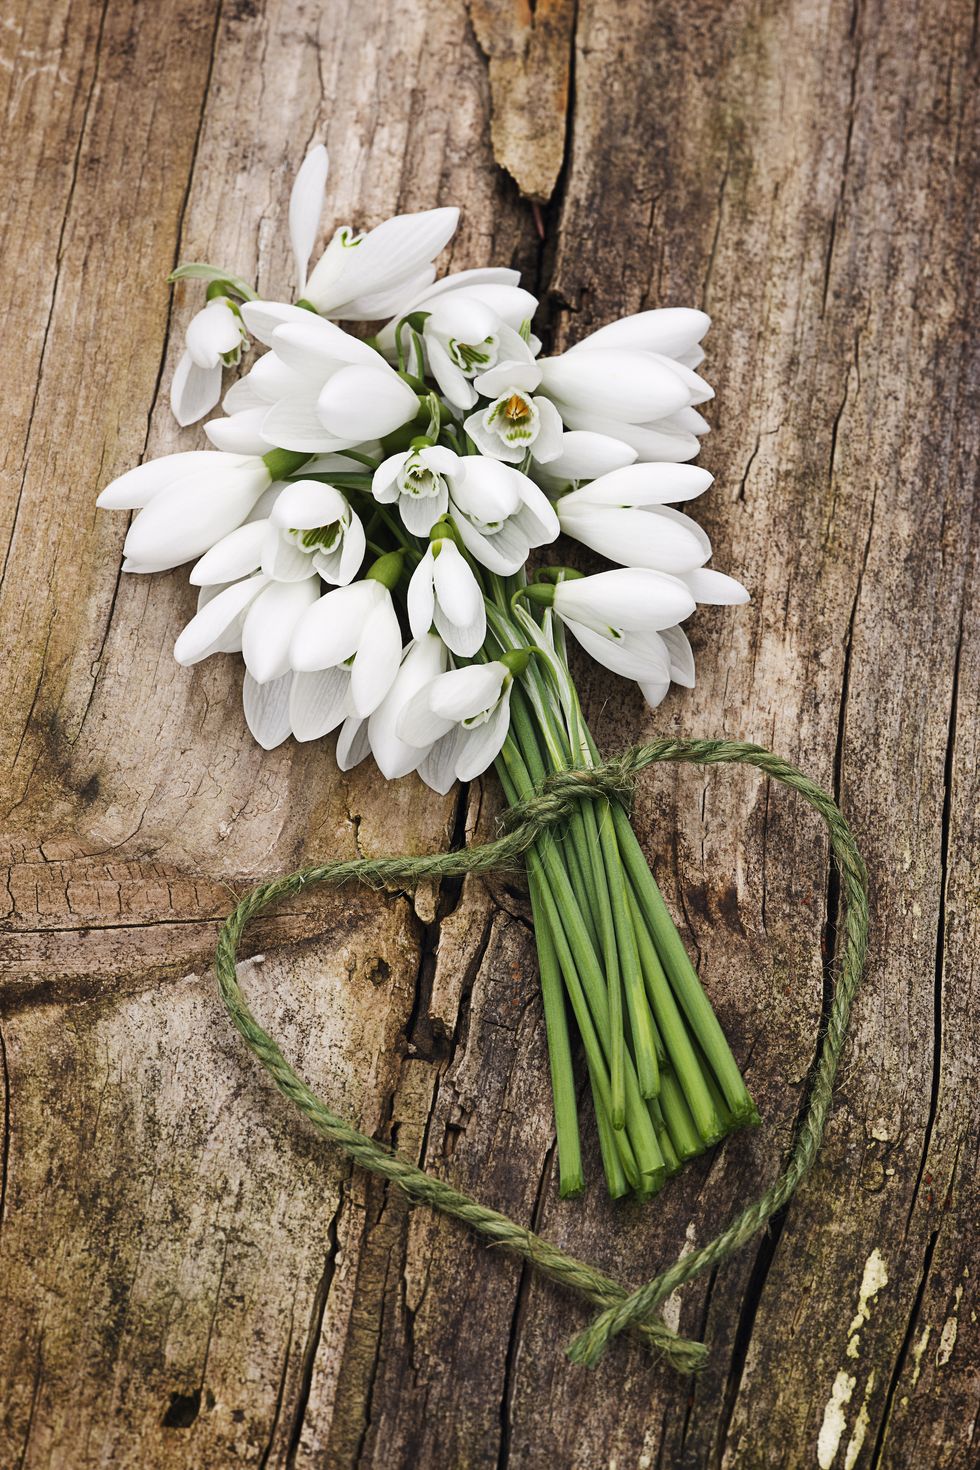 <p>Snow-white holiday blooms may seem like the perfect wintery gift for your host or hostess, but beware of cultural norms that could affect how they're received. 'Make sure your gift doesn't contain any cultural symbolism for the host,'&nbsp;says Blum. 'For example, white flowers in Asian cultures are considered funeral flowers.'</p>